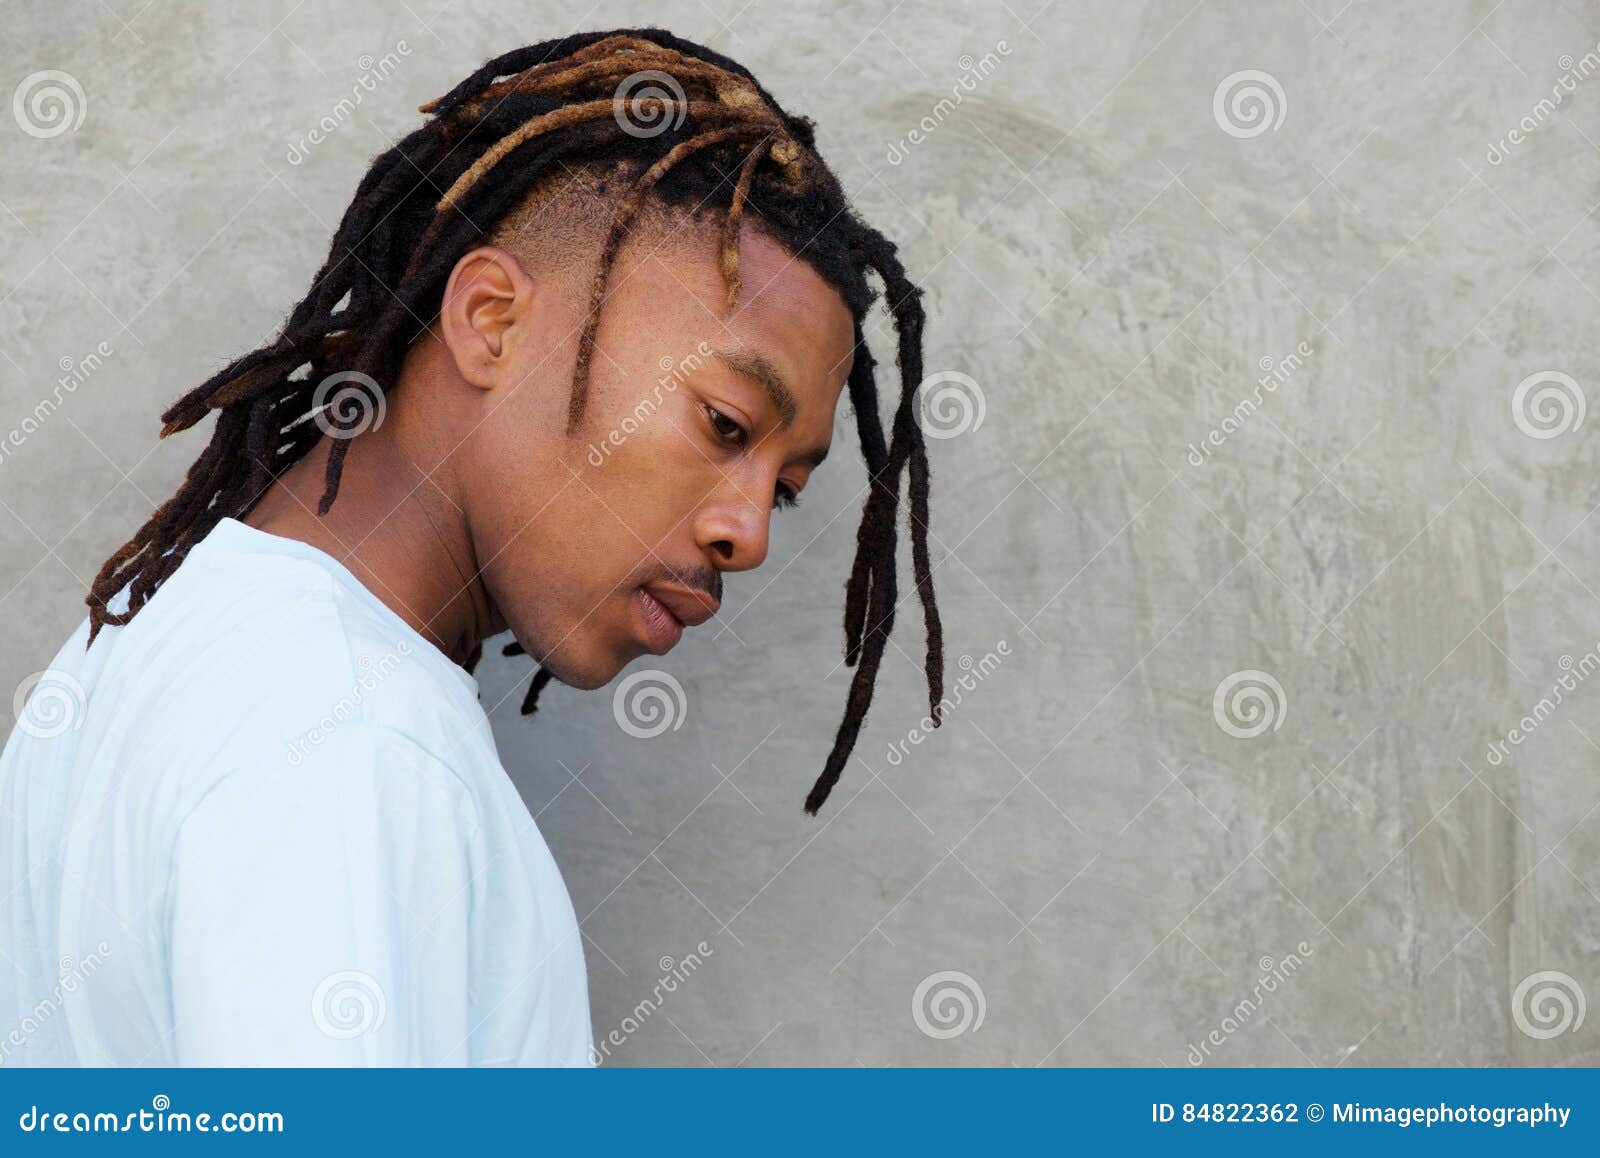 side portrait of african man with dreadlocks in contemplation